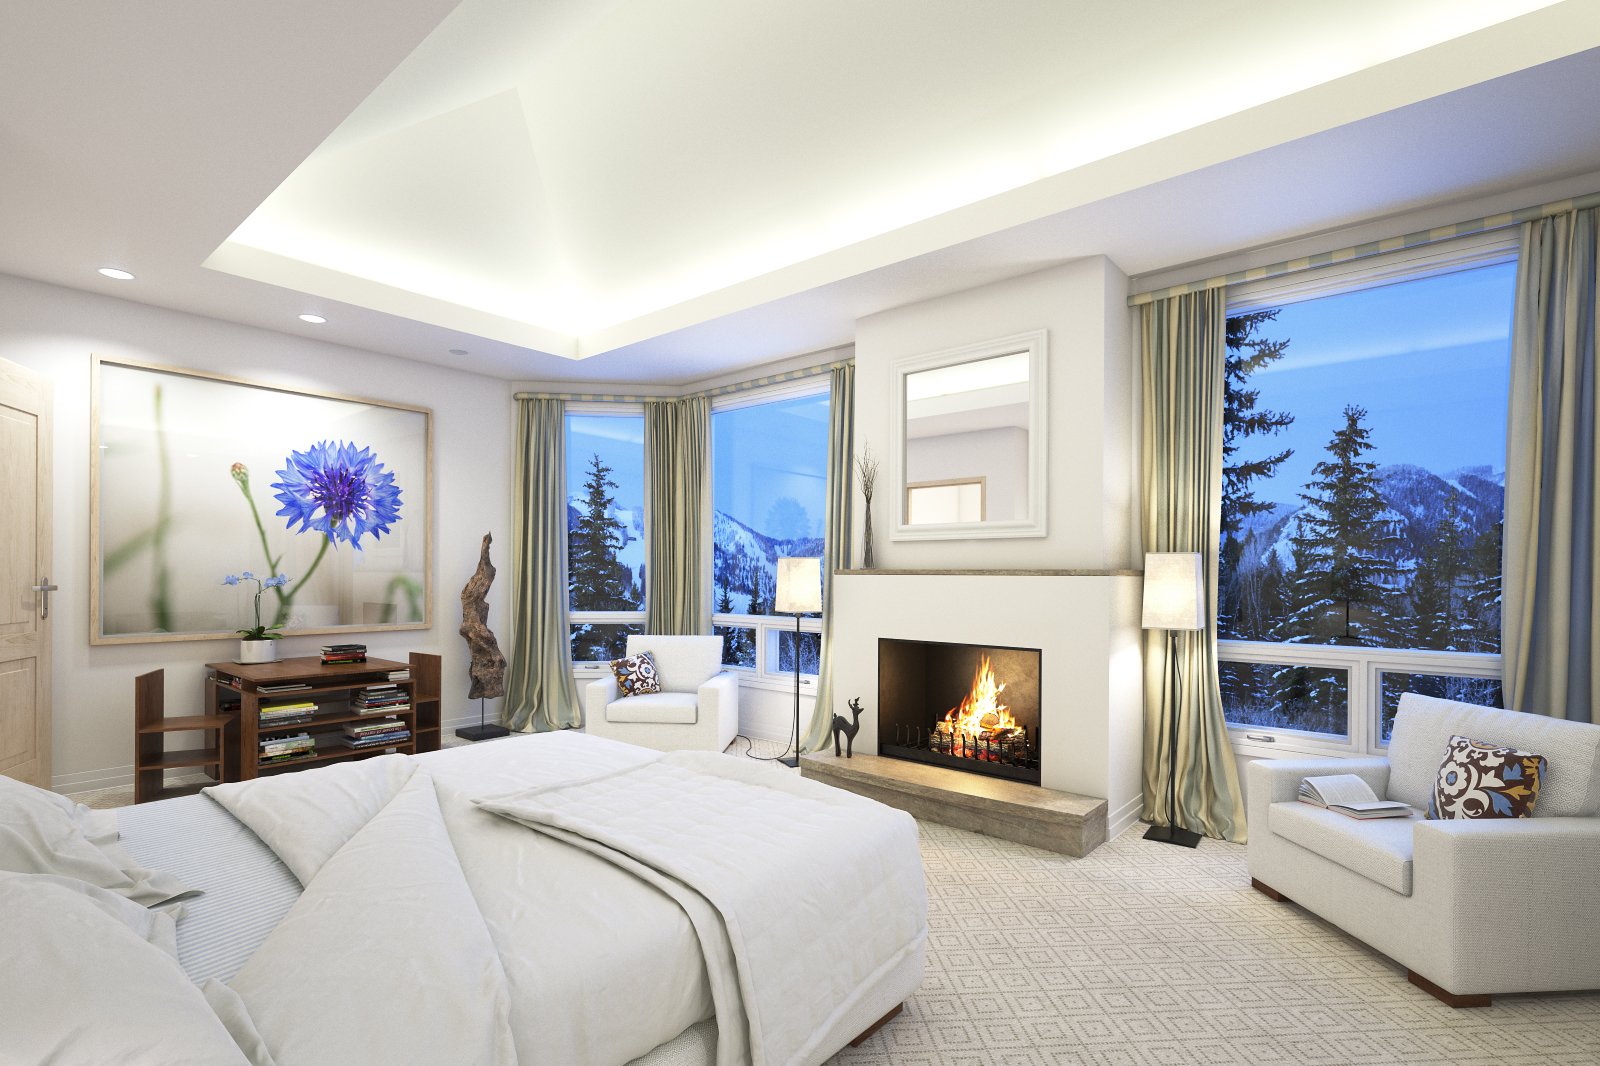 Lighting Above Fireplace Awesome Making Of A Bedroom with Fireplace Tip Of the Week